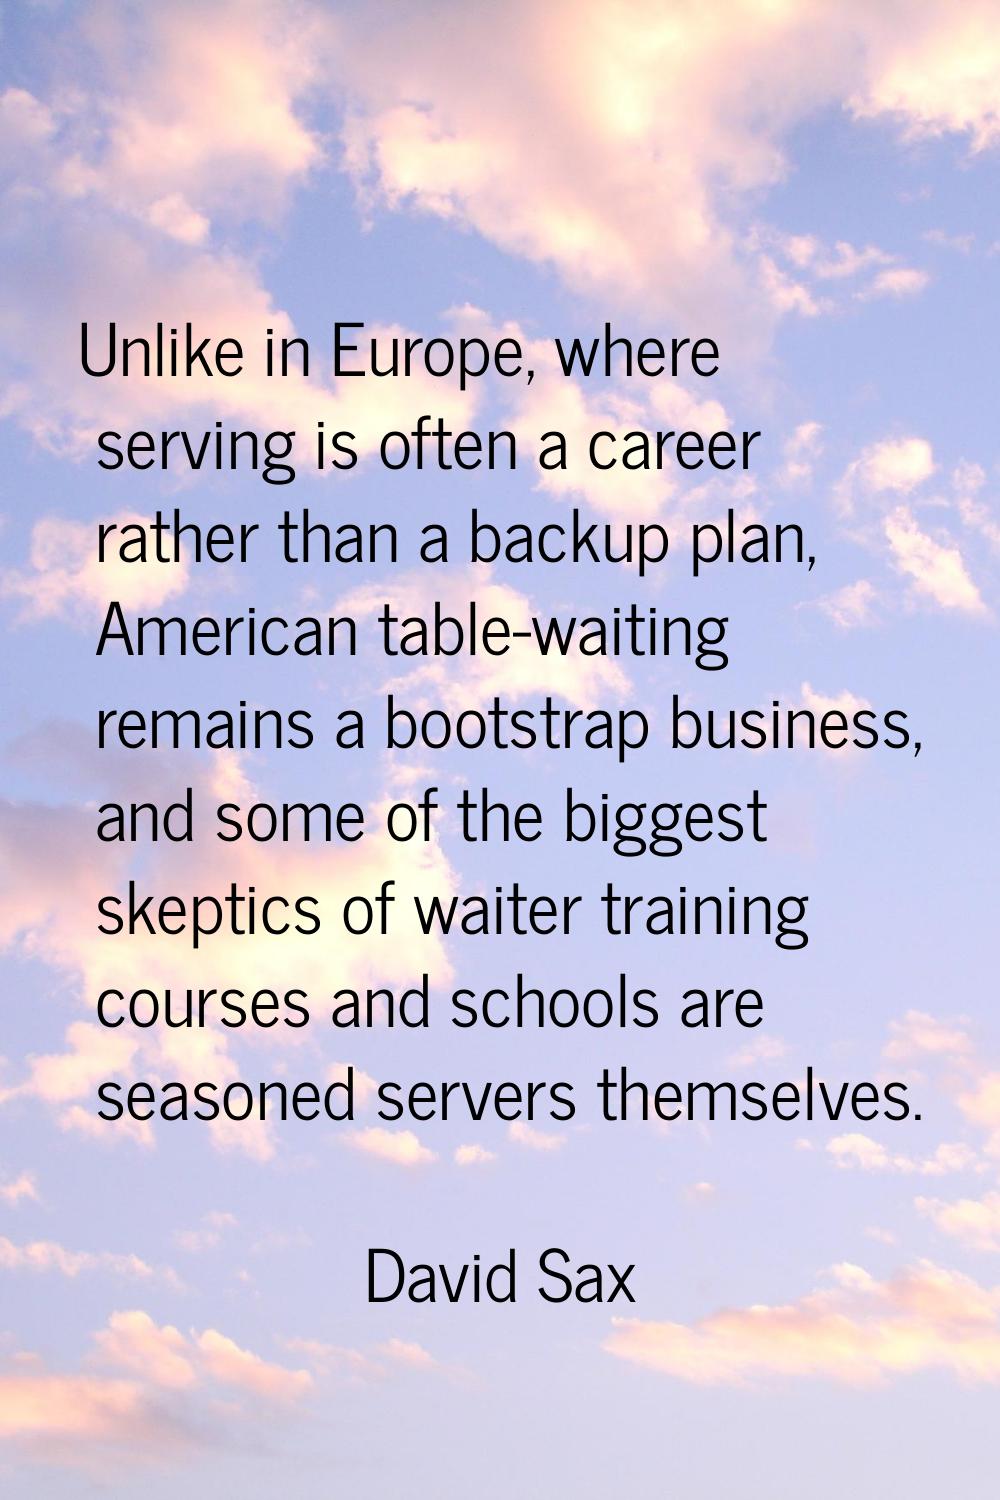 Unlike in Europe, where serving is often a career rather than a backup plan, American table-waiting